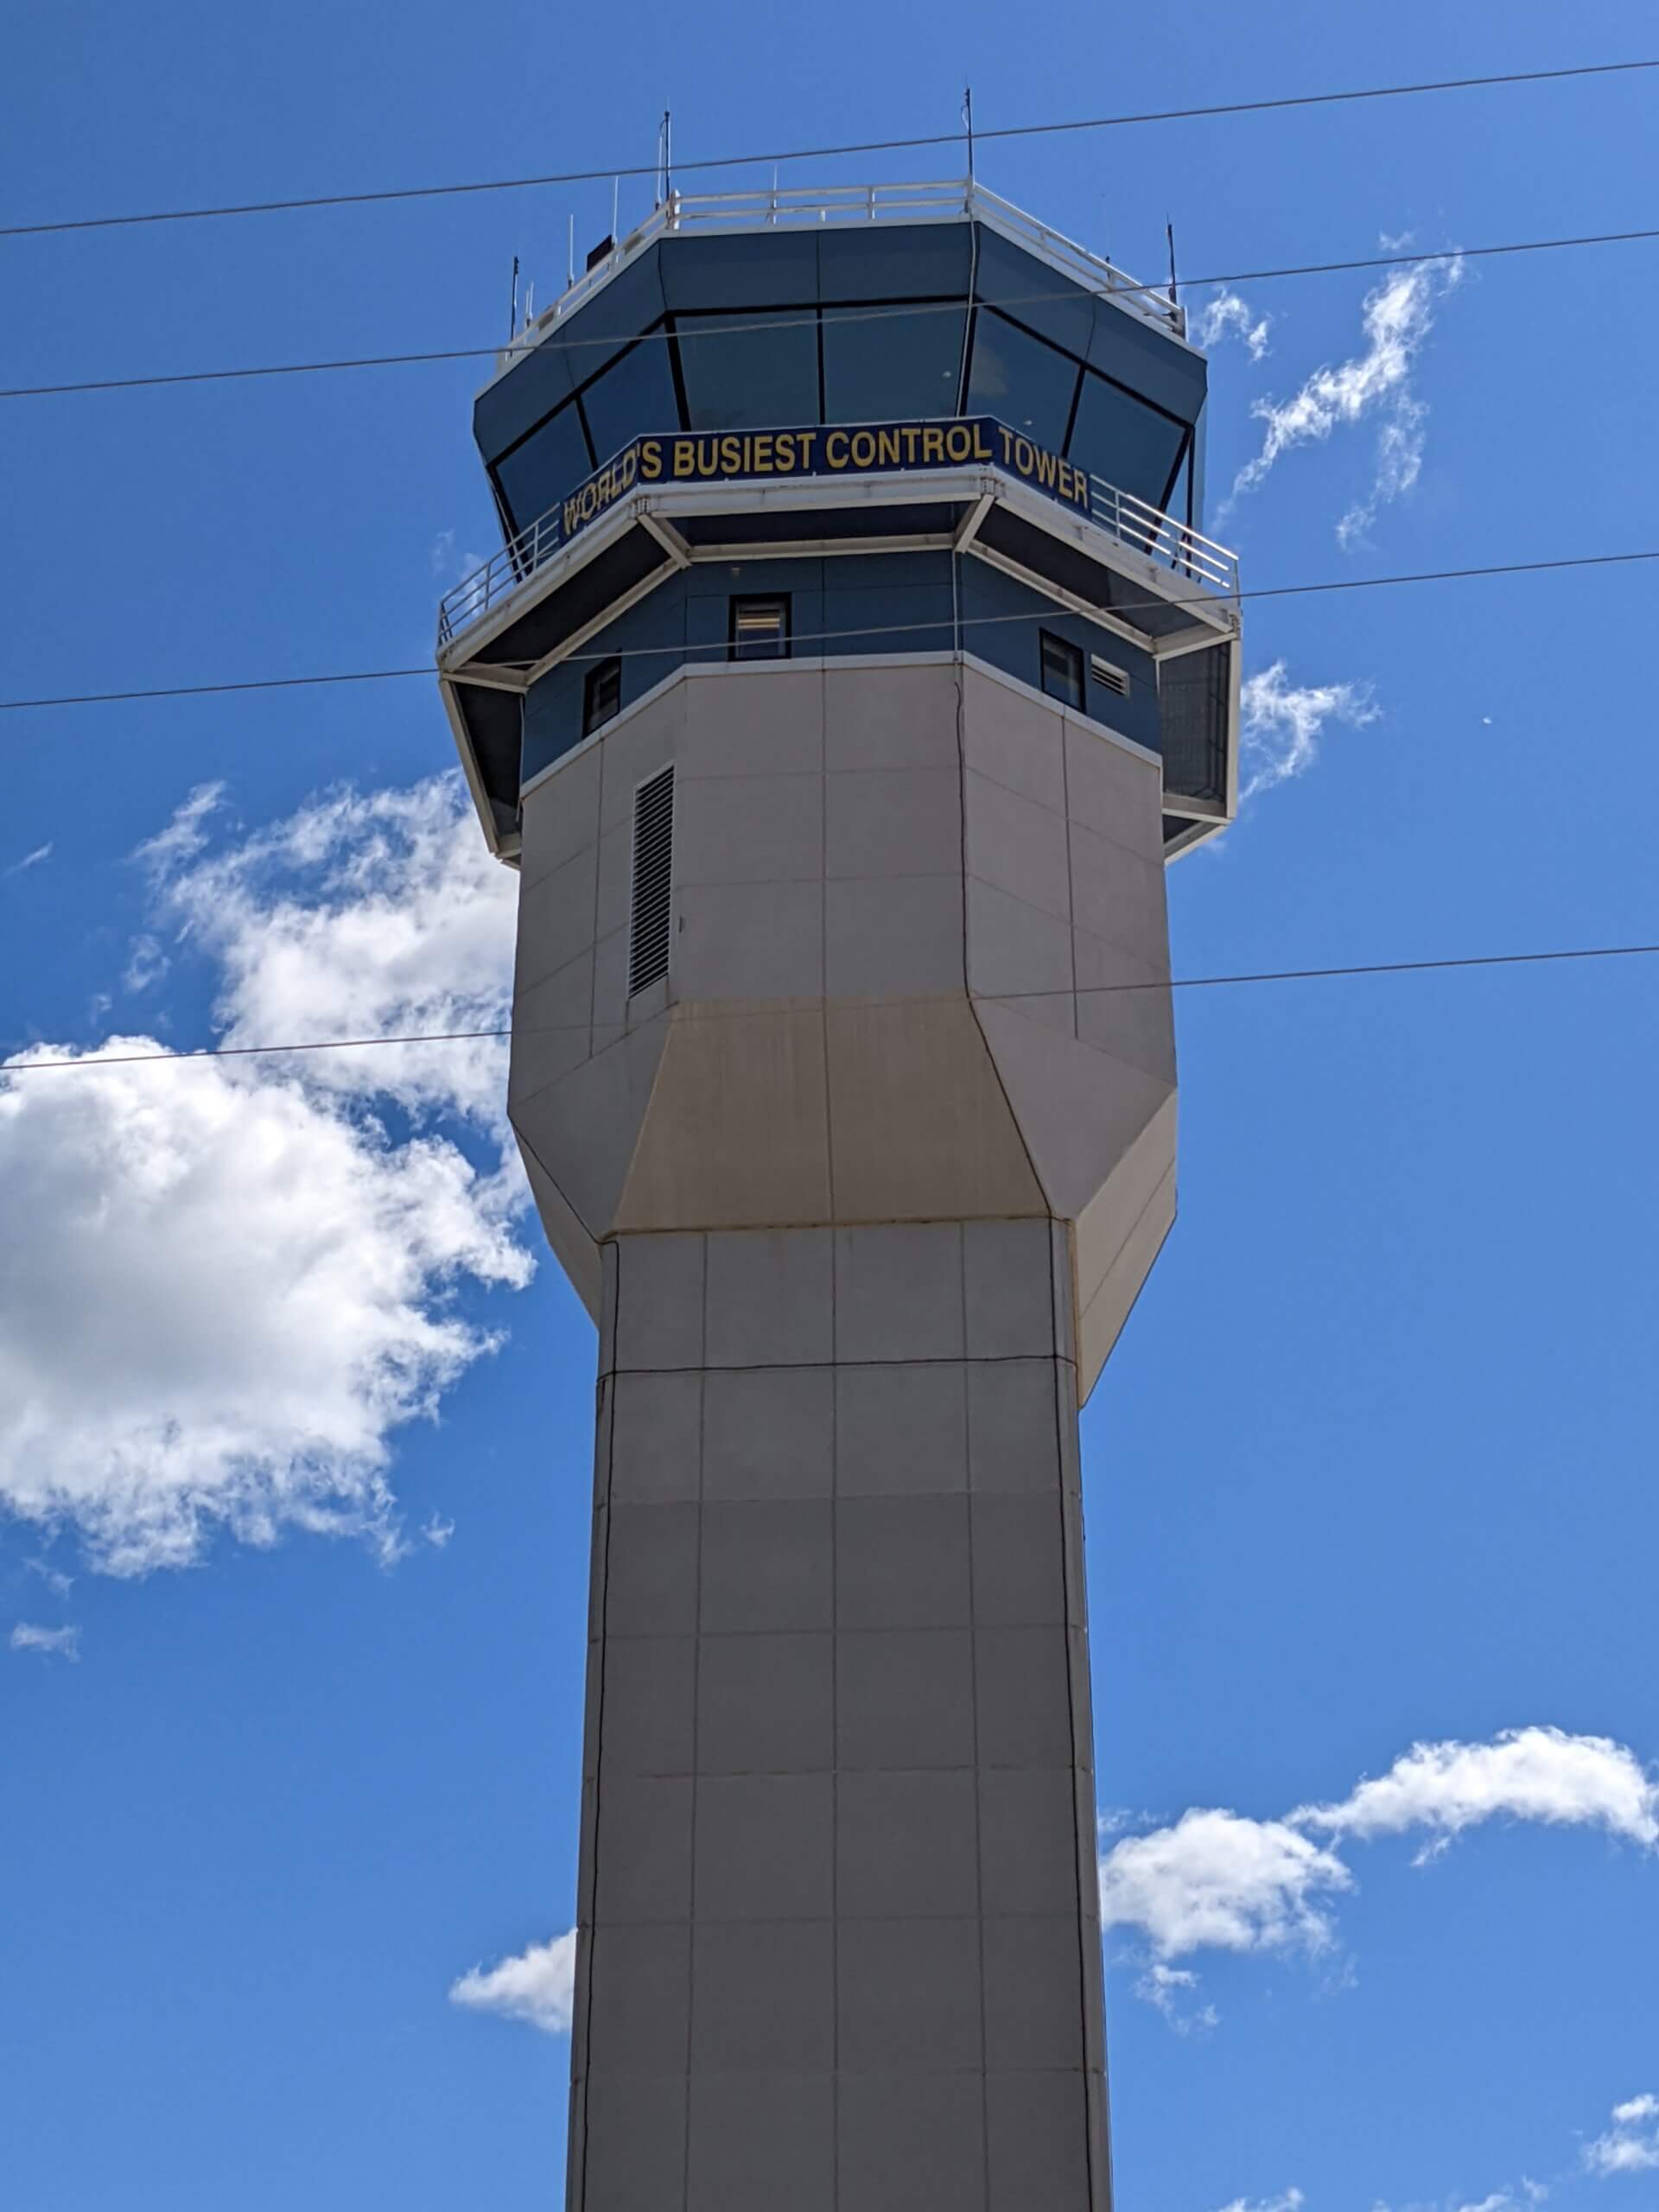 The air traffic control tower at Oshkosh with a banner that reads "World's Busiest Control Tower"